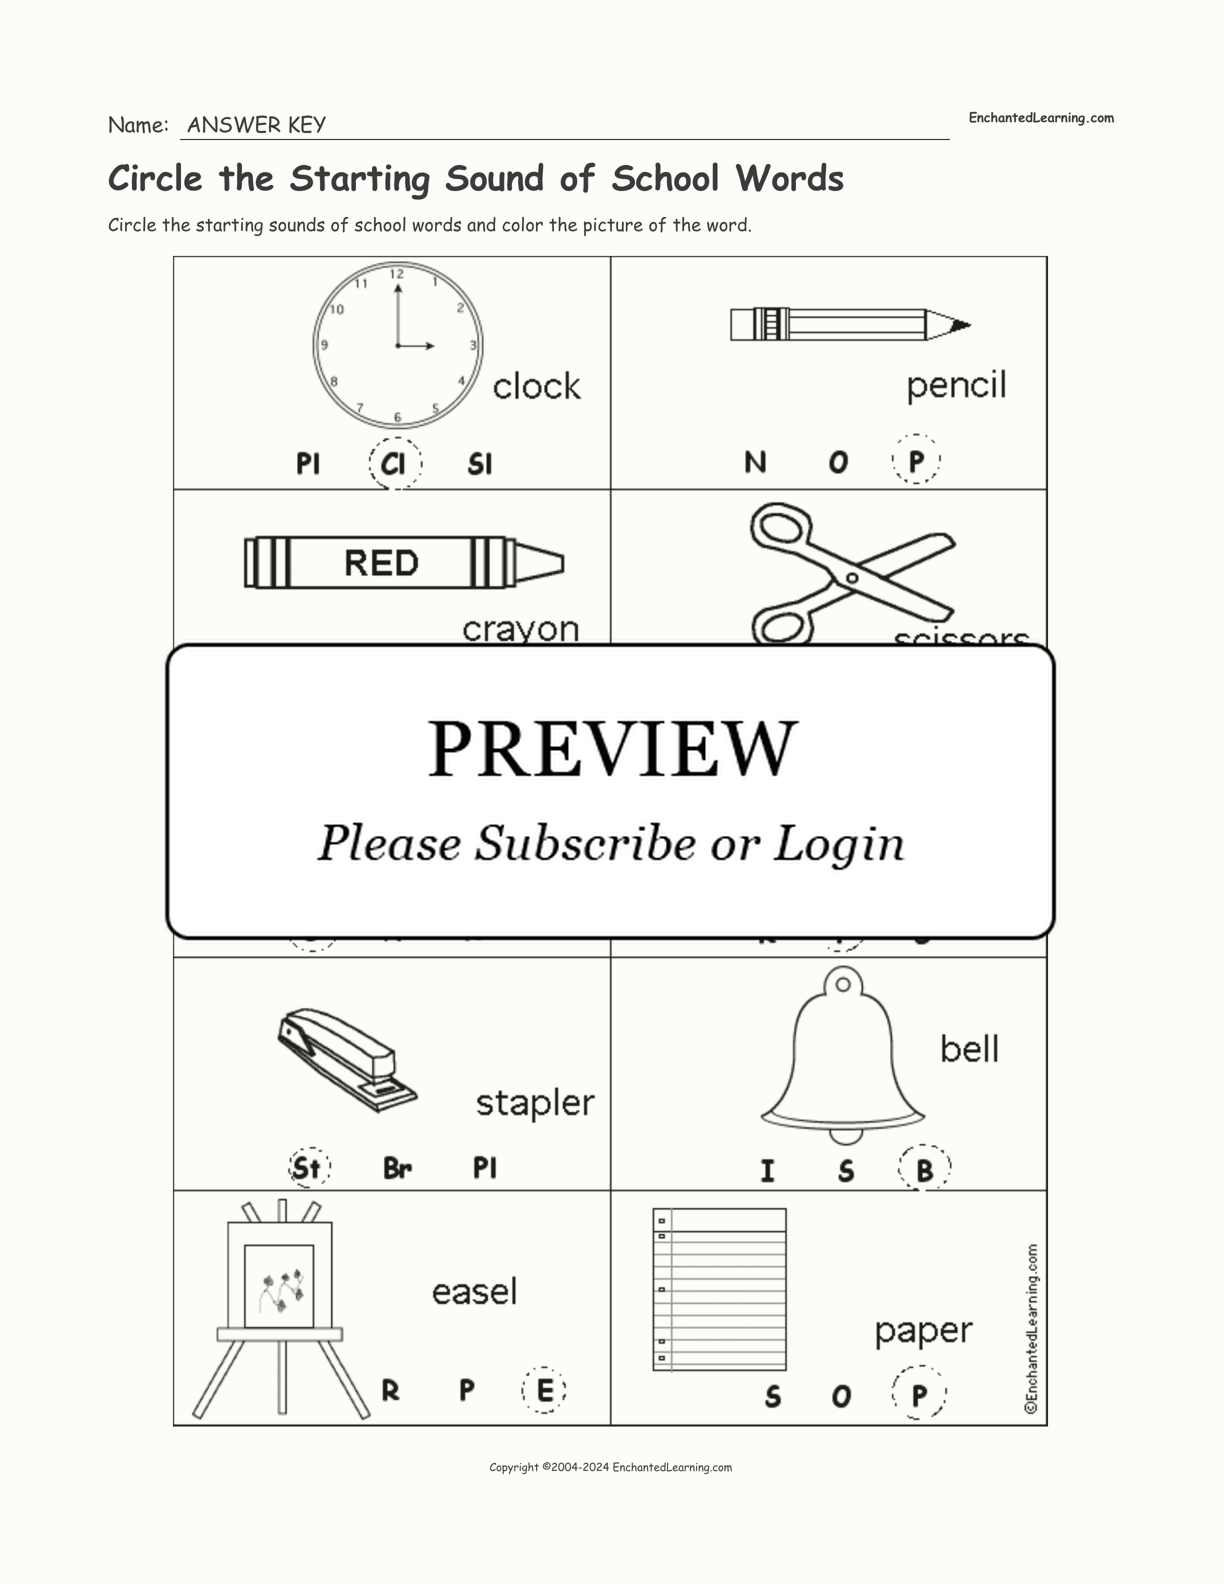 Circle the Starting Sound of School Words interactive worksheet page 2